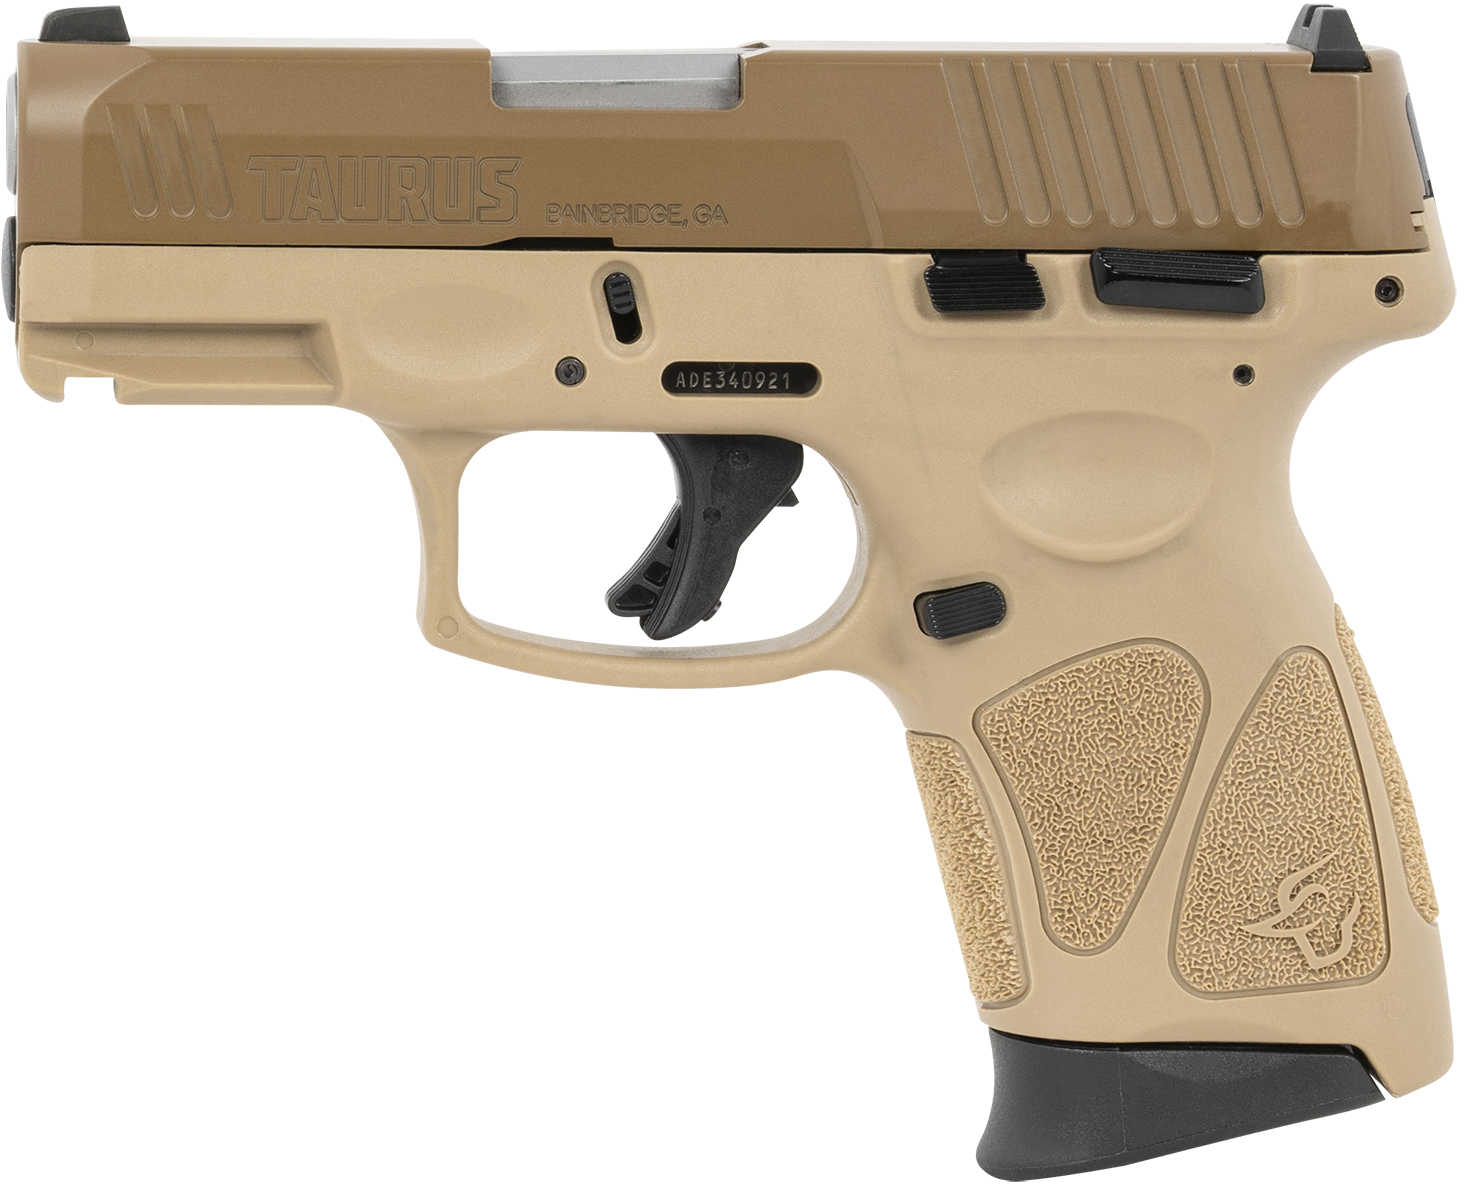 Taurus G3c Single Action Only Semi-Automatic Pistol 9mm Luger 3.2" Stainless Steel Barrel (3)-12Rd Magazine Fixed Front & Adjustable Rear Sights Coyote Cerakote Finish